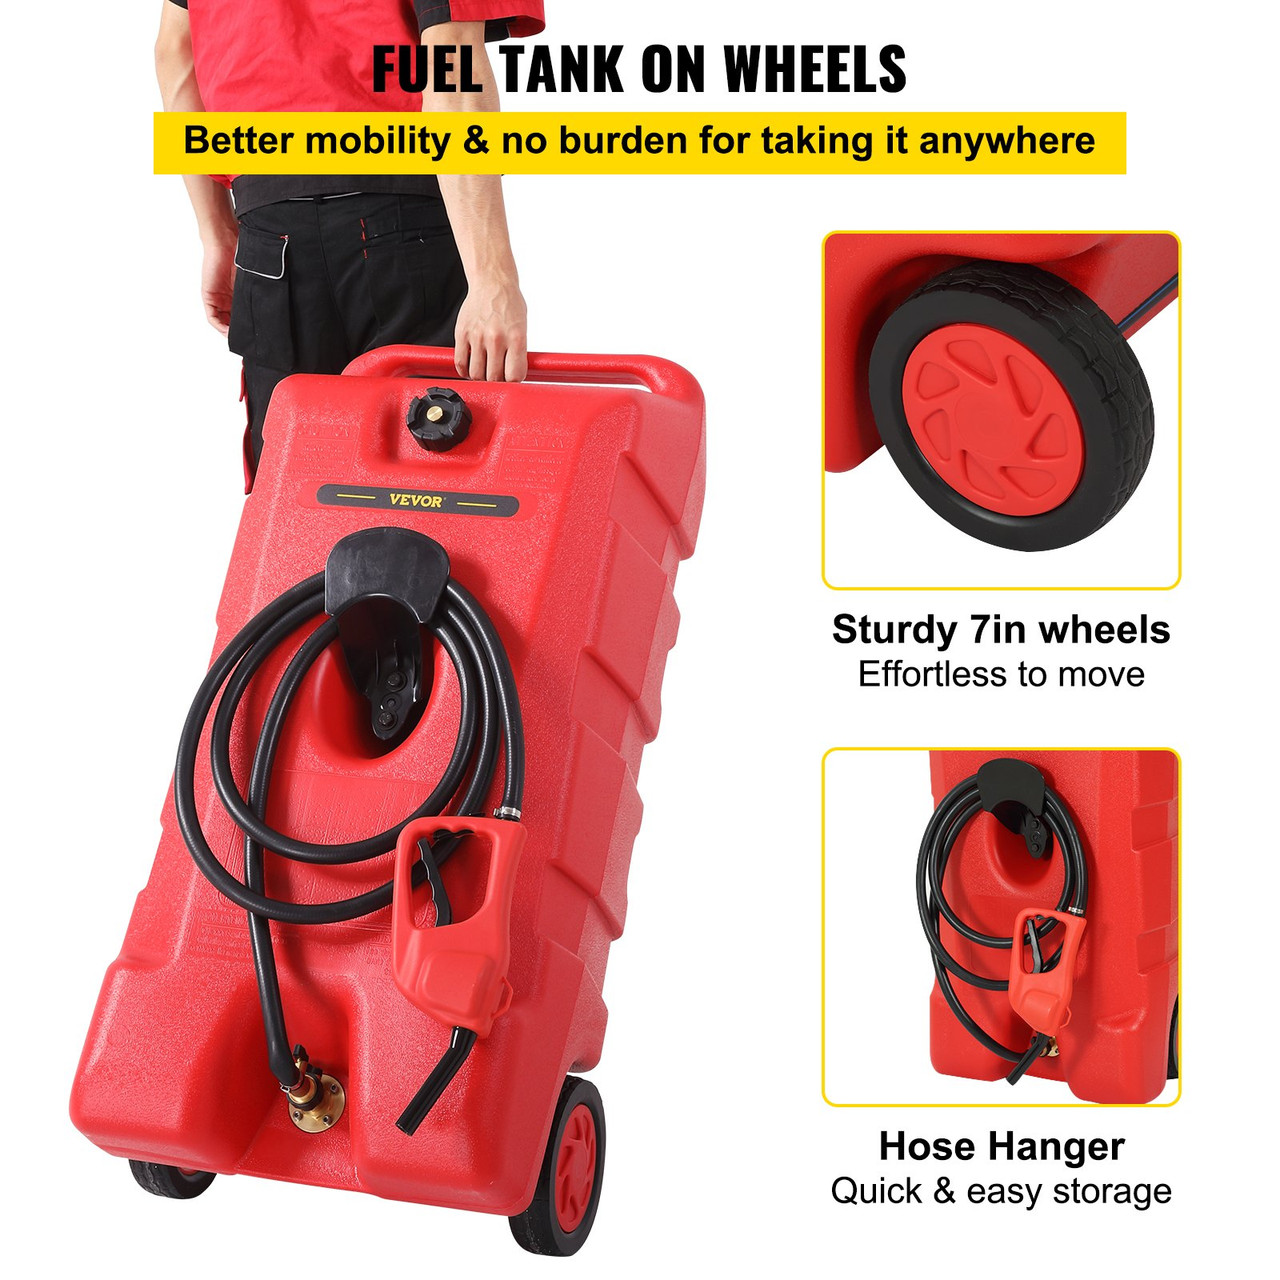 Fuel Caddy, 25 Gallon, Gas Storage Tank on-Wheels, with Siphon Pump and 9.8 ft Long Hose, Gasoline Diesel Fuel Container for Cars, Lawn Mowers, ATVs, Boats, More, Red